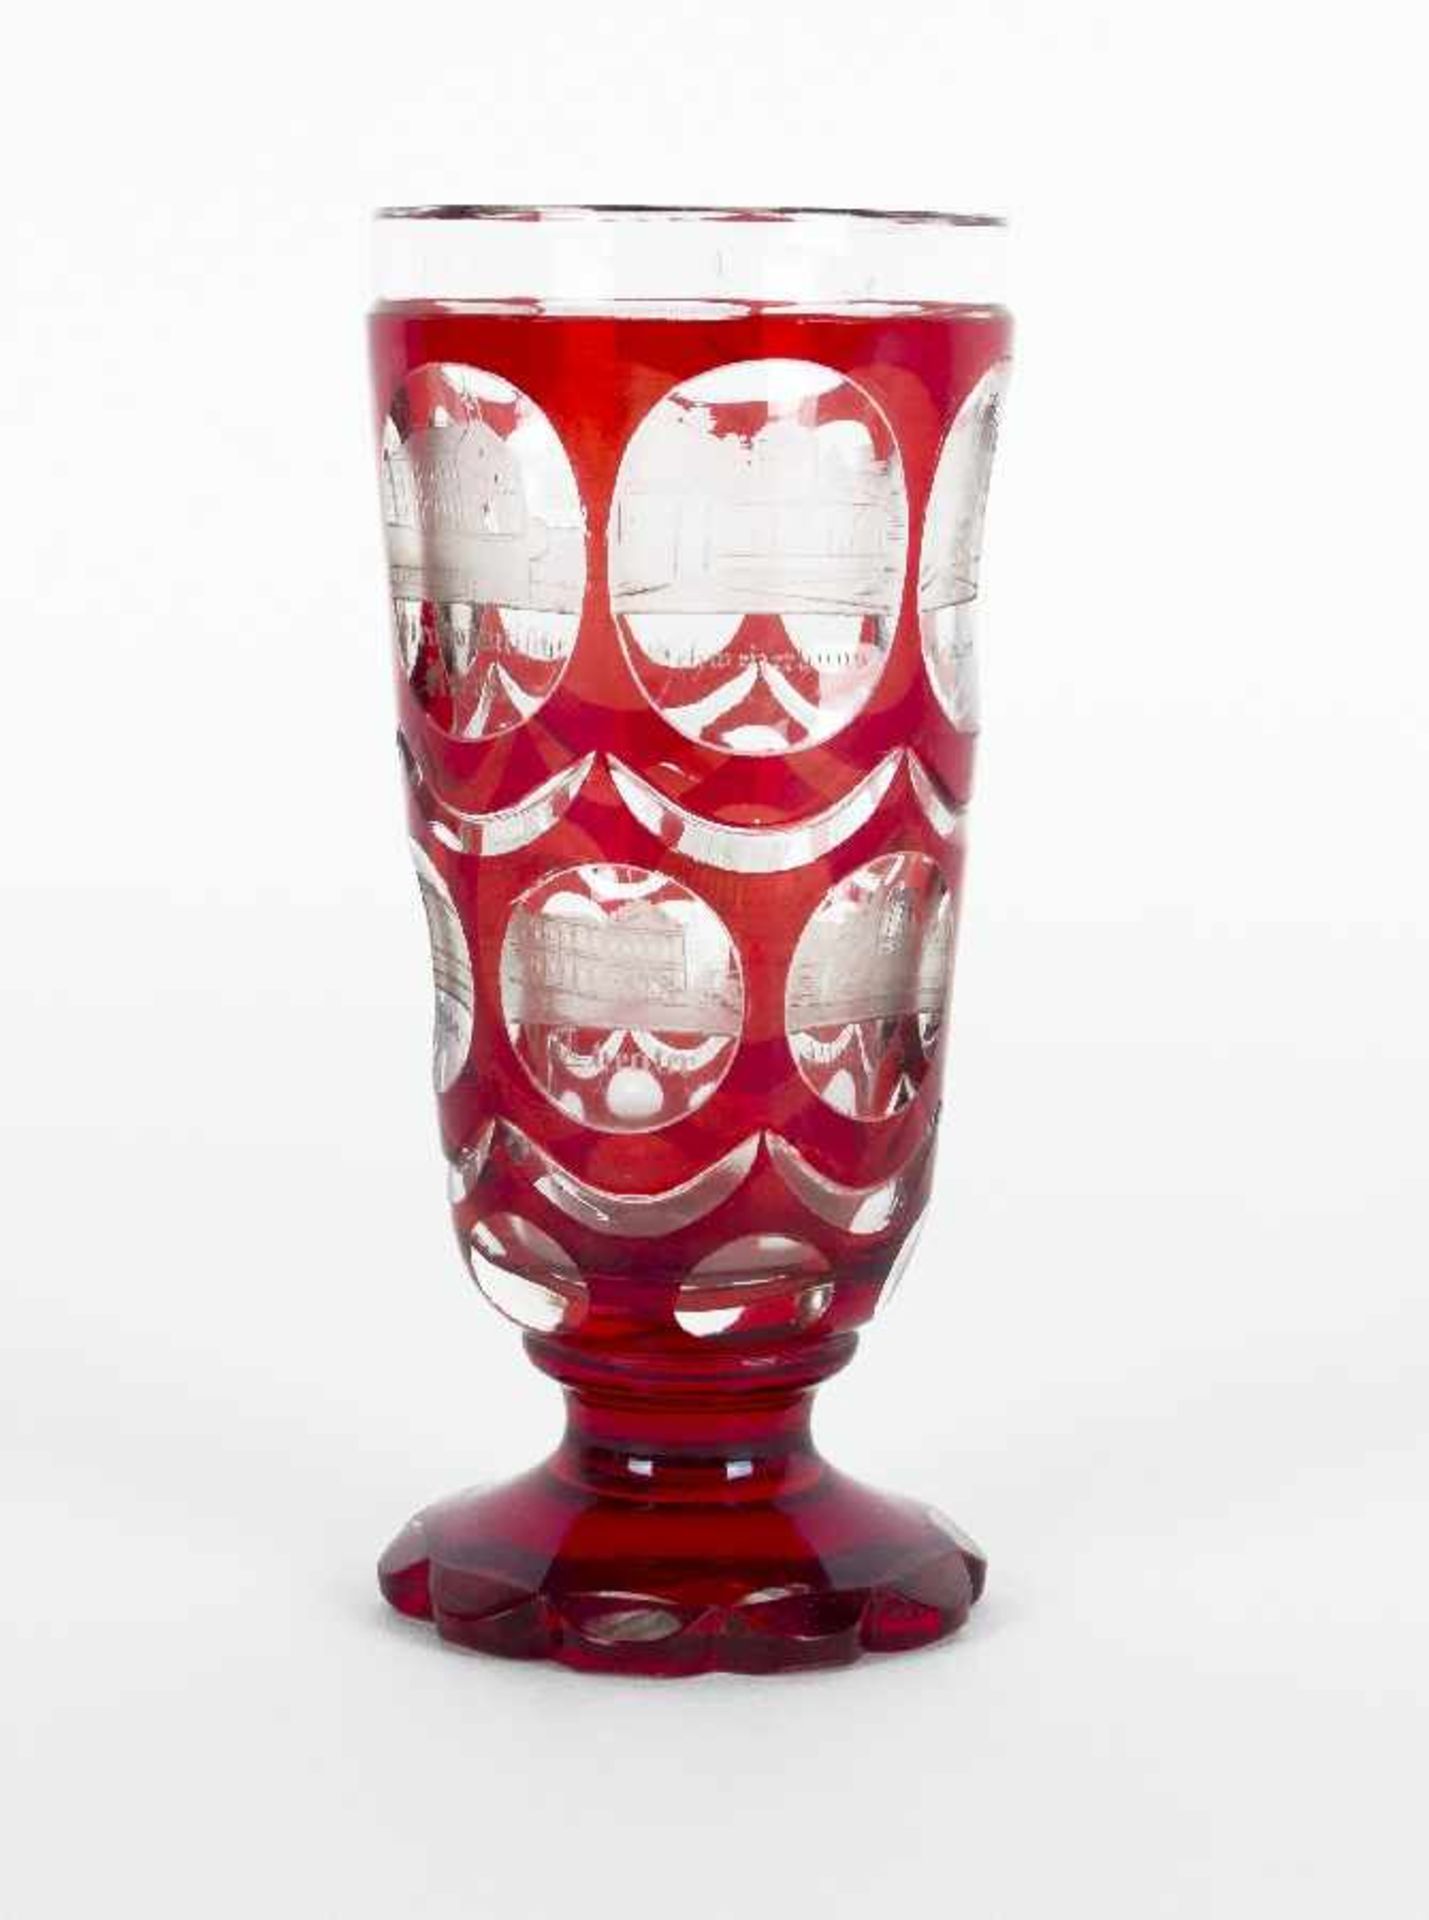 Bohemia, 19th centuryBathhouse glasCrystal glass, overlaid with red glass and cut with architectural